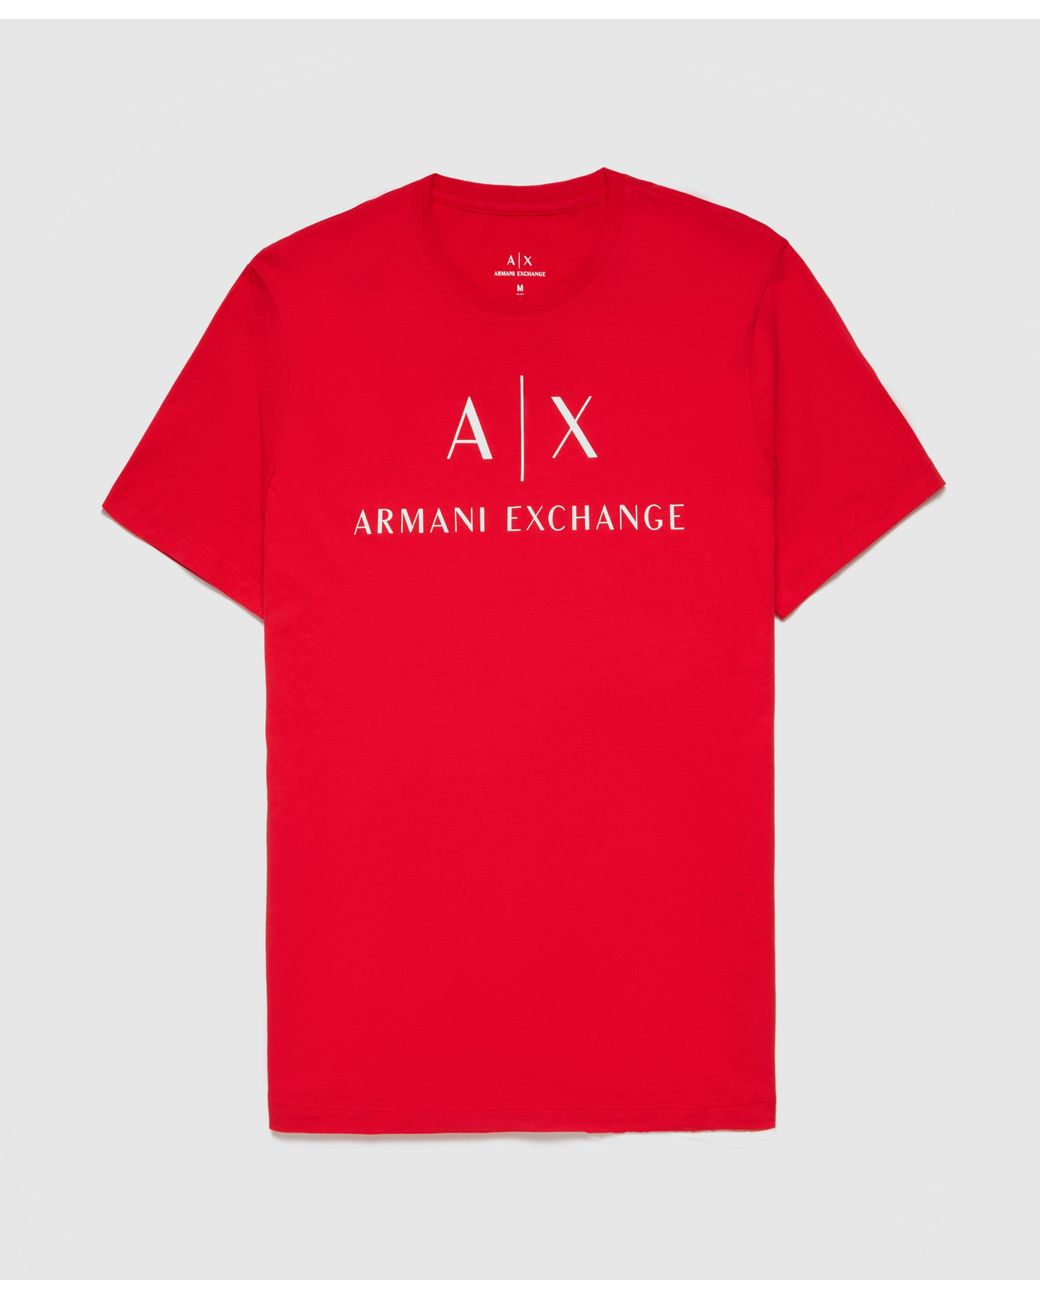 Armani Exchange Core Logo T-shirt in Red for Men - Lyst